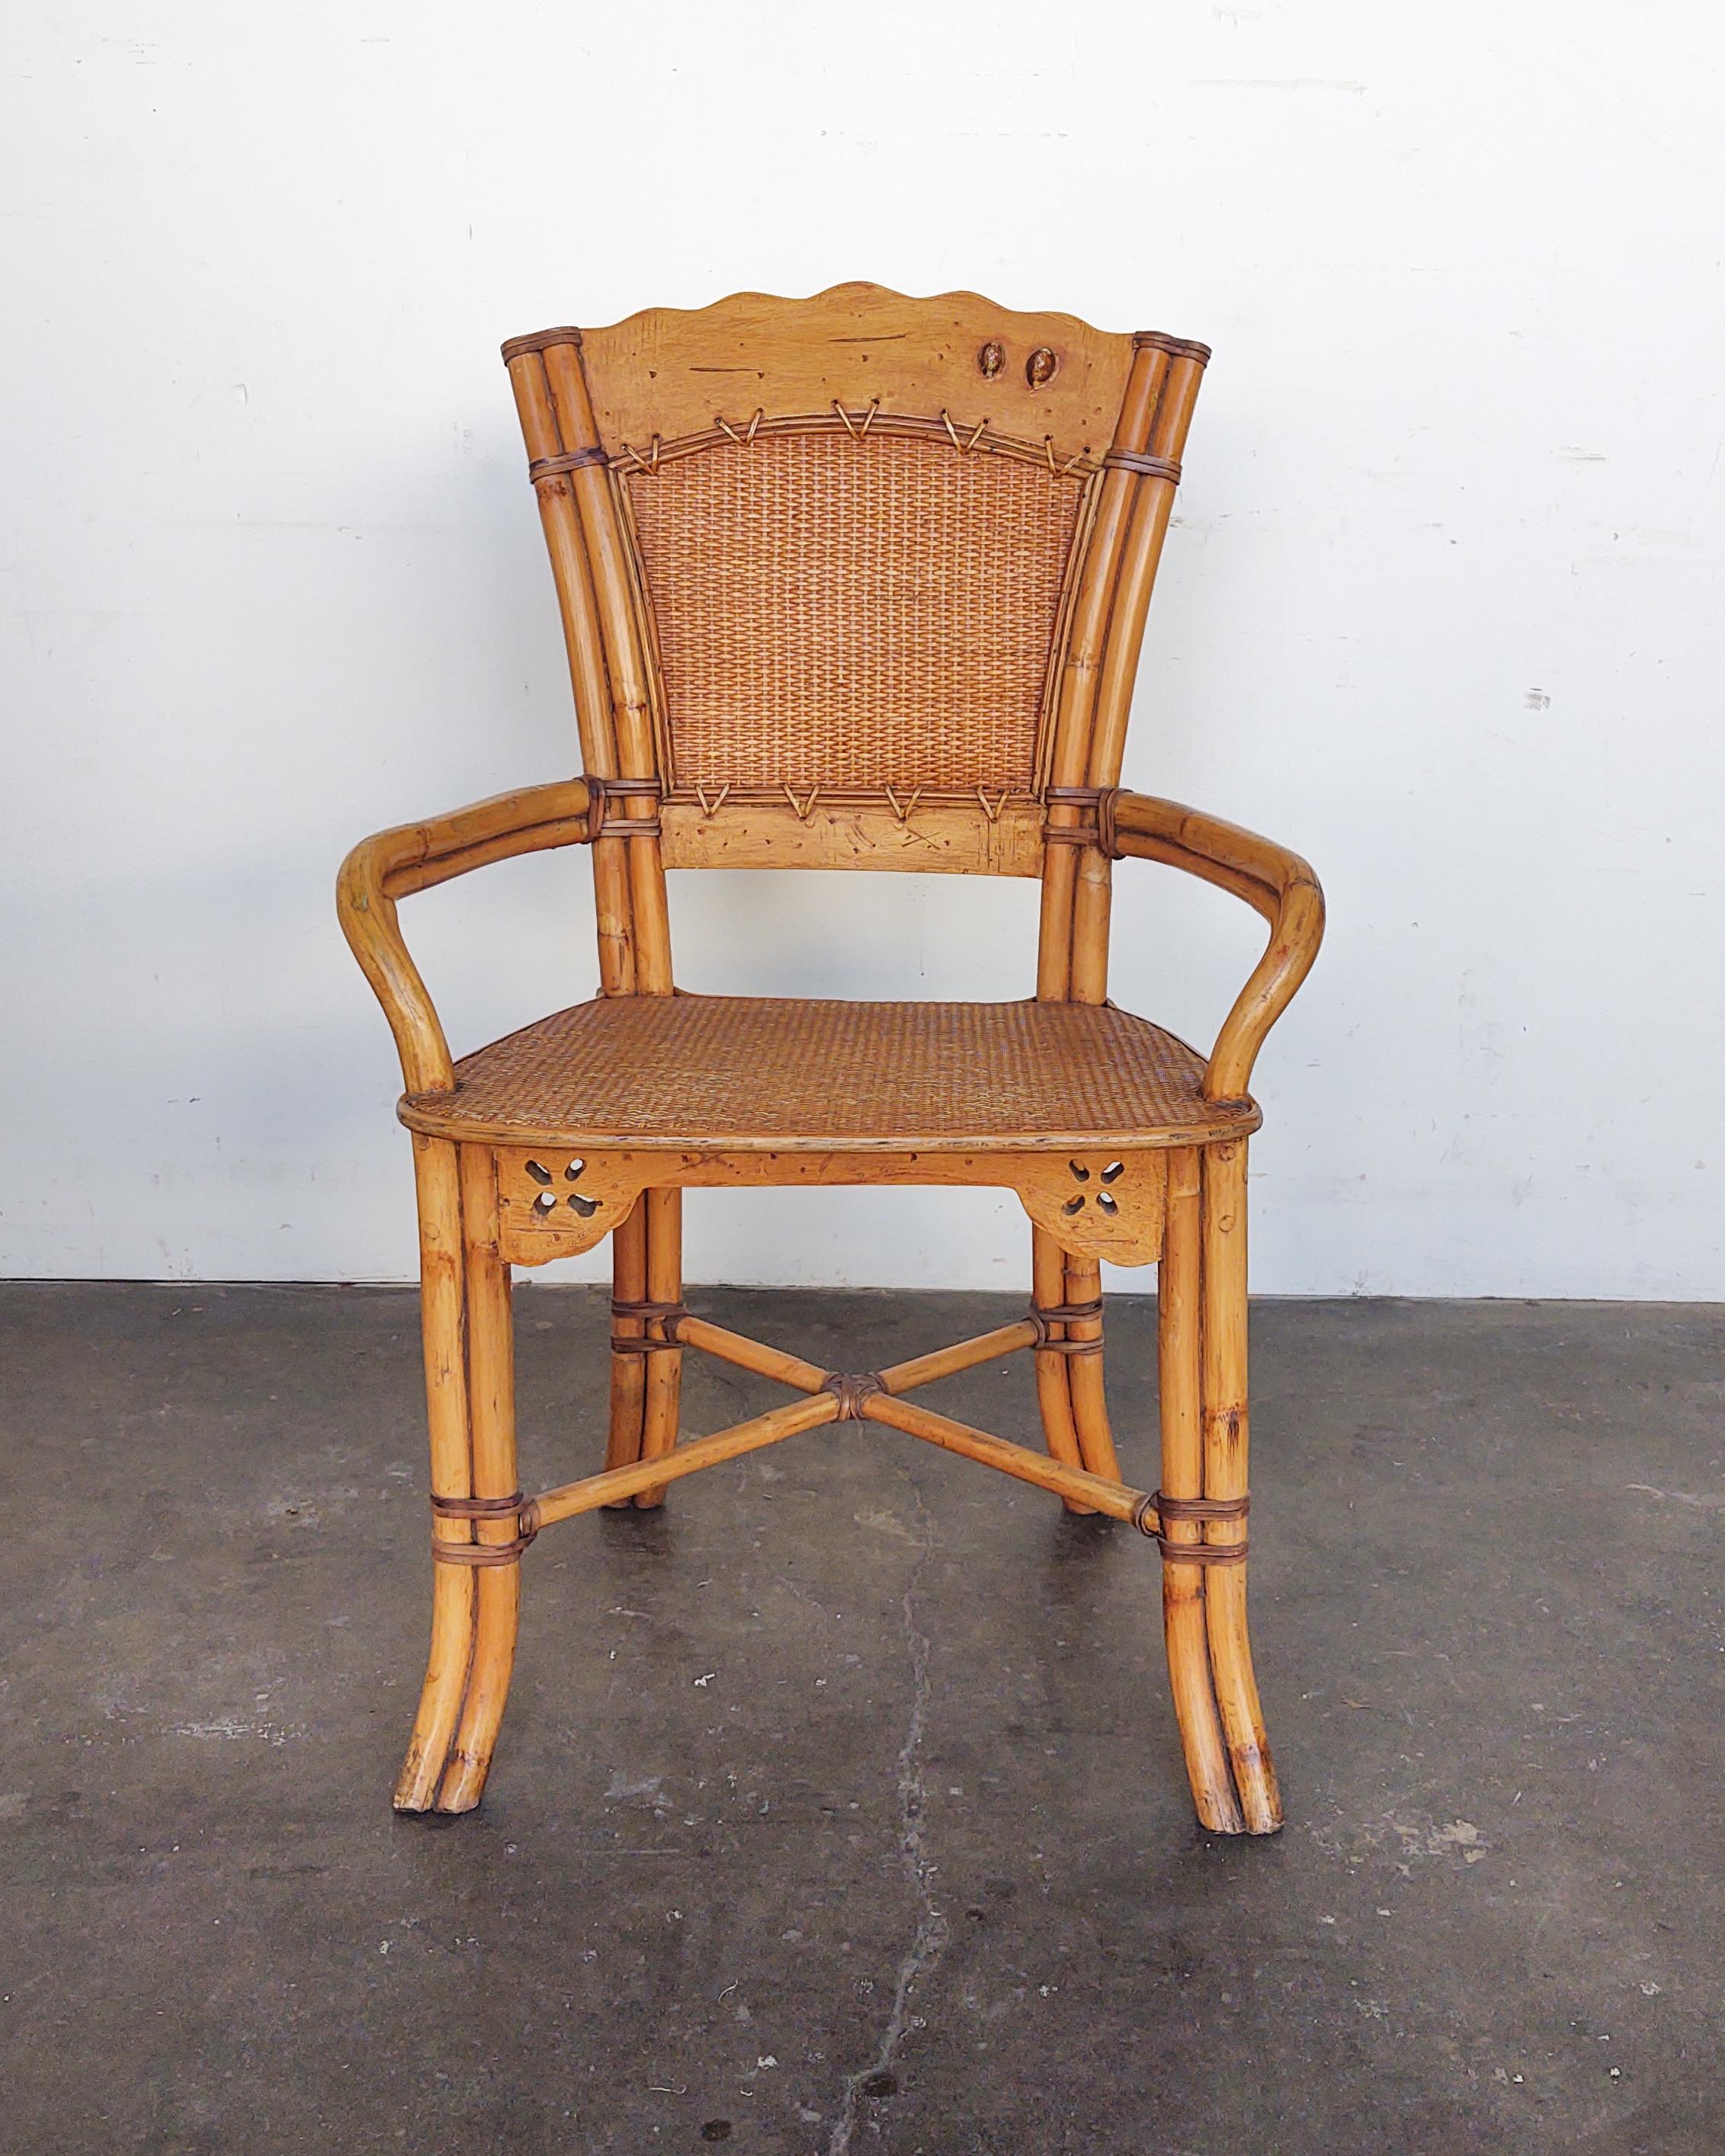 Sculptural rattan arm chair with scalloped back rest. Framed piece of woven cane on backrest with an inlay of two cowrie shells. 

Measures: 23.5